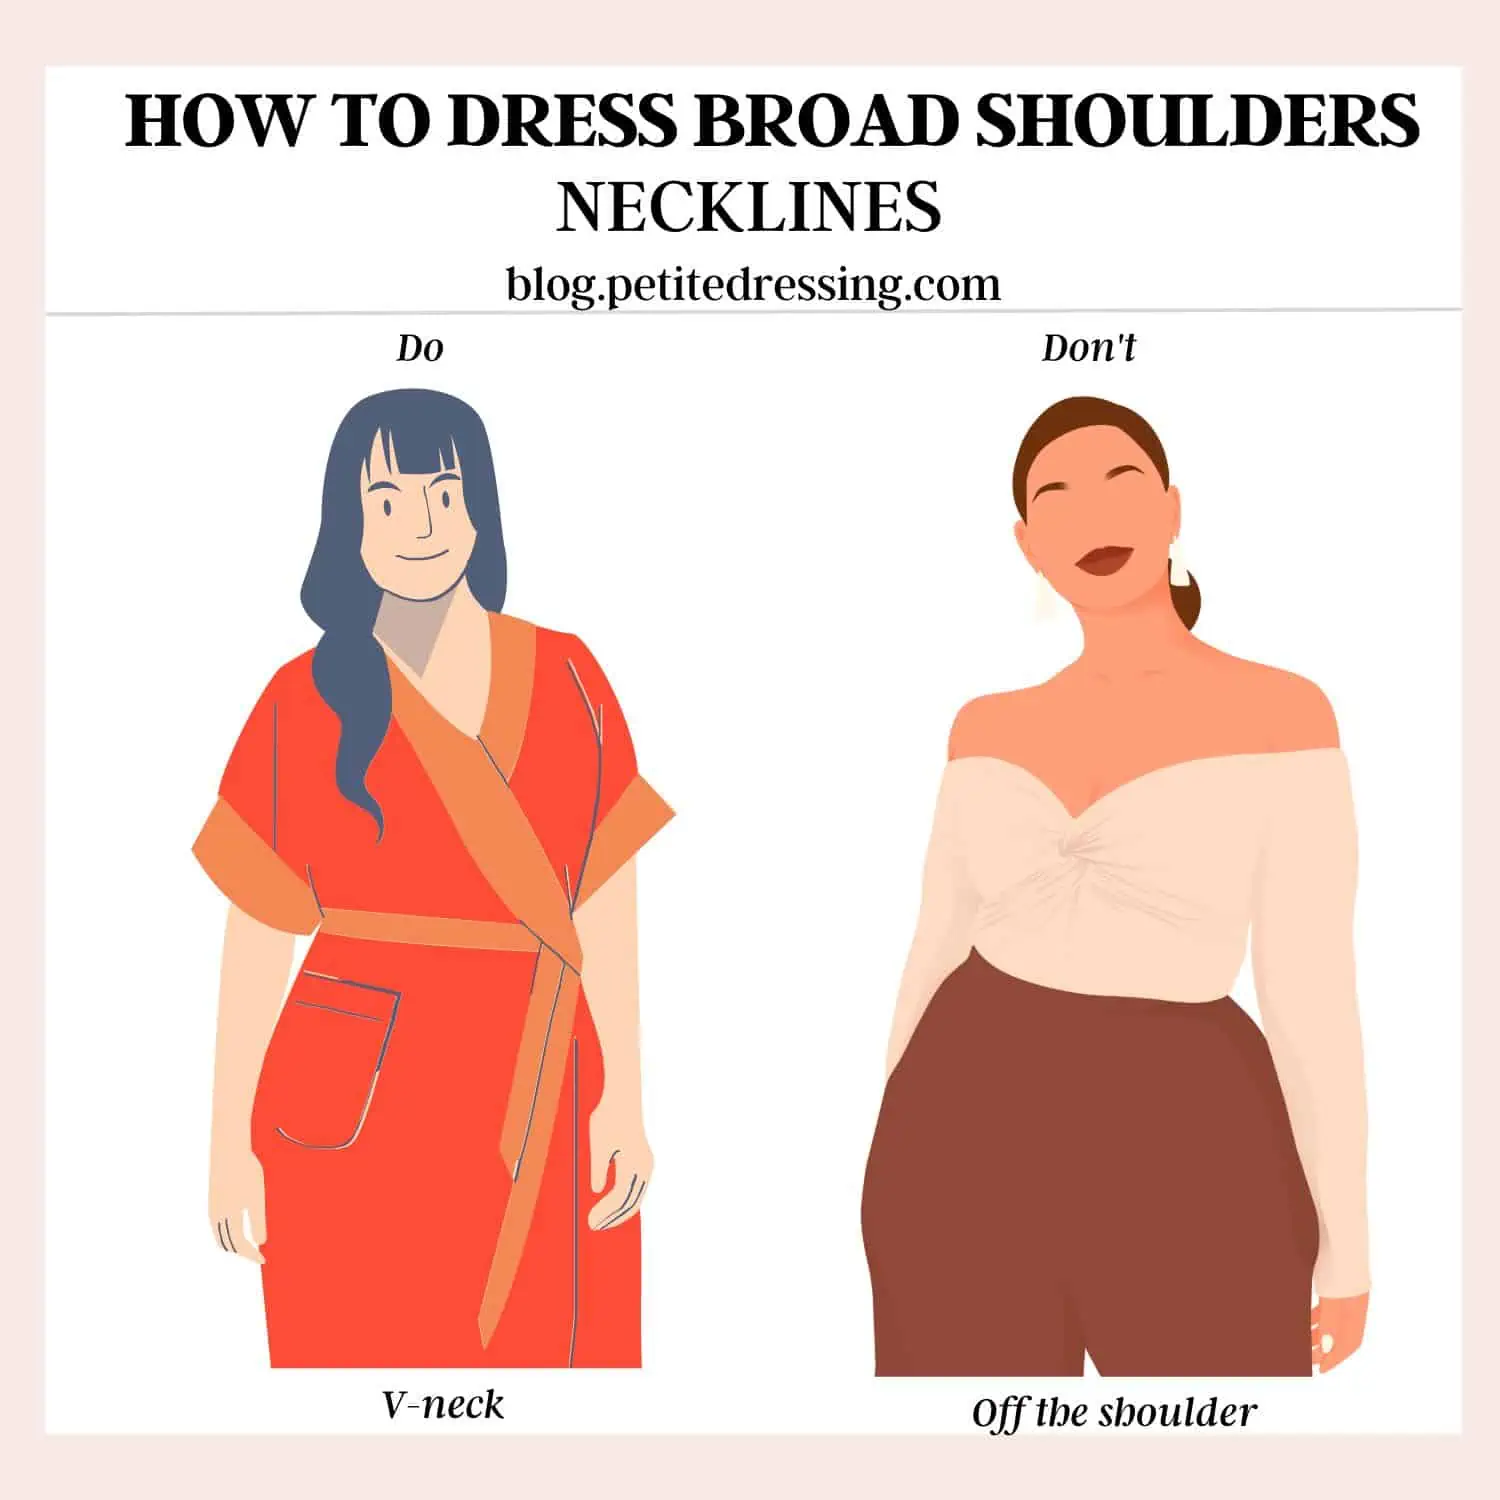 The Tops Guide for Women with Broad Shoulders - Petite Dressing